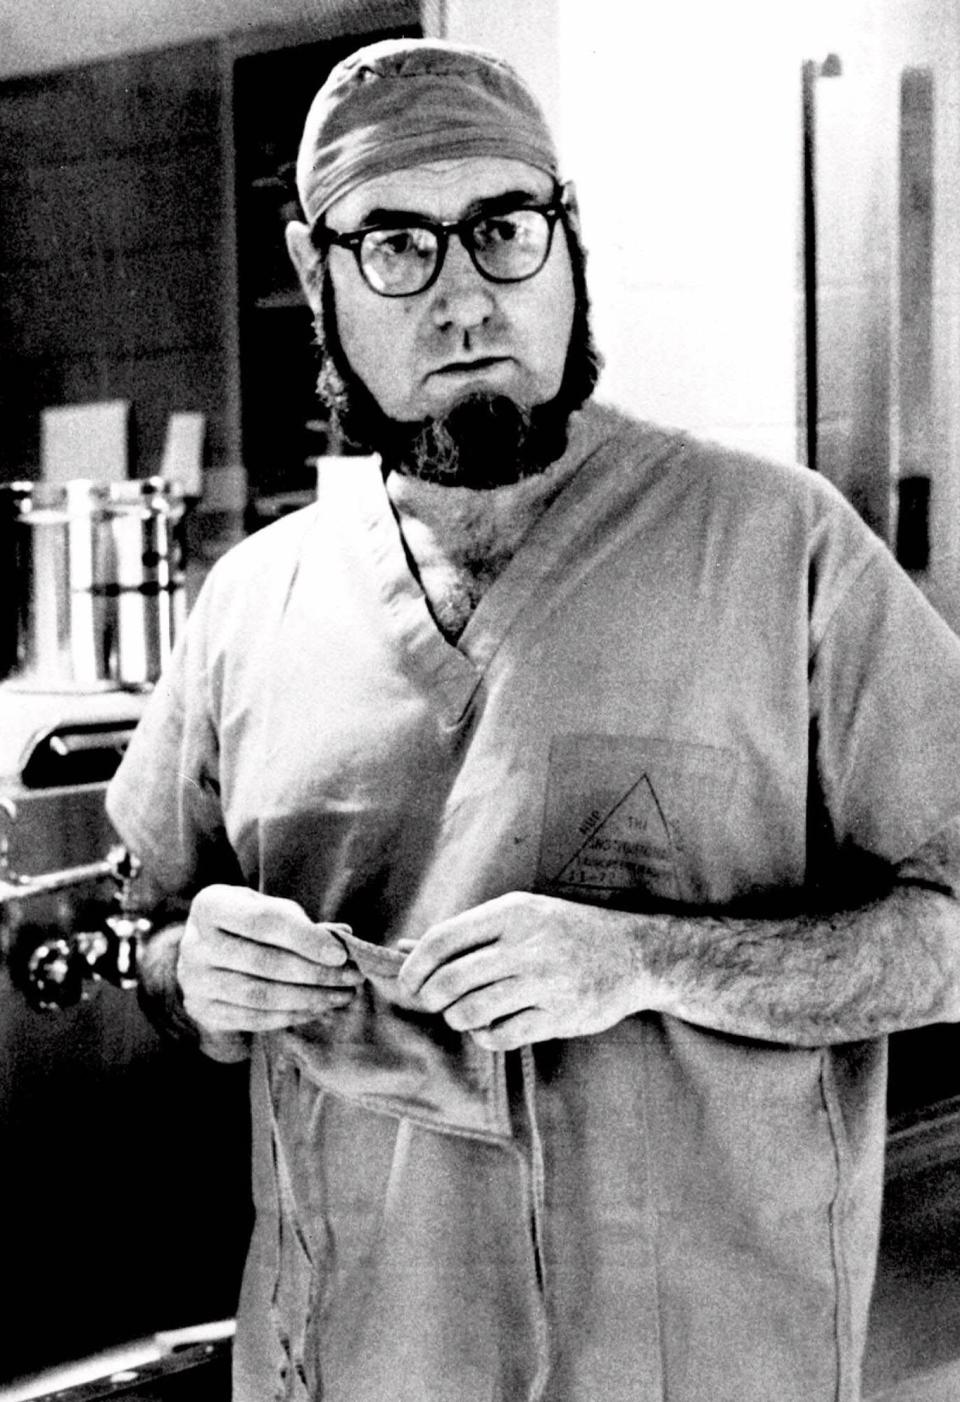 Dr. C. Everett Koop, surgeon-in-chief at Children's Hospital in Philadelphia, talks about surgery that separated 13-month-old siamese twins, Clara and Alta Rodriguez, Sept. 19, 1974. (AP Photo/William Ingram)